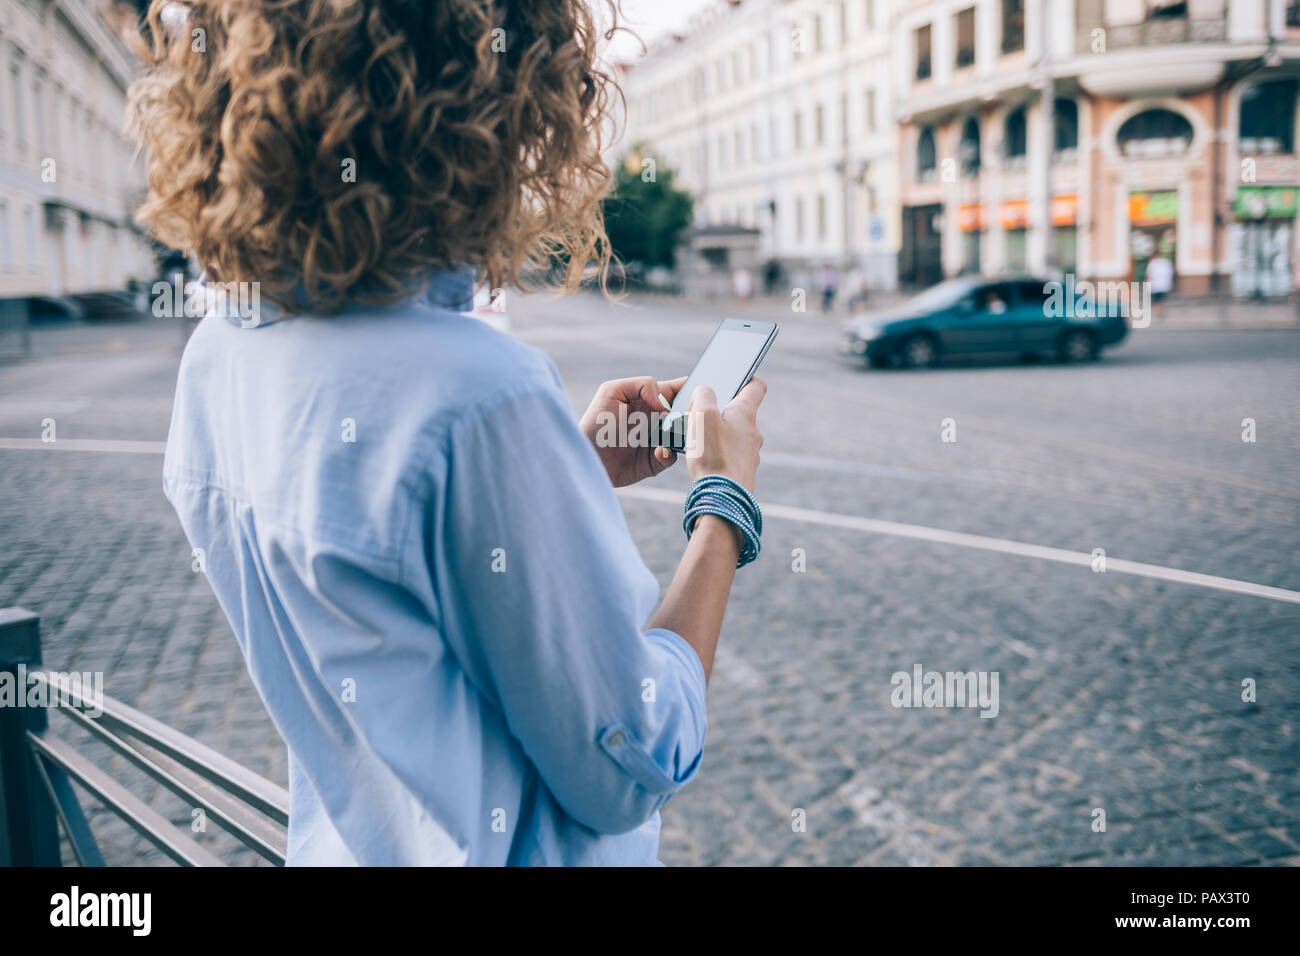 Rear view unrecognizable curly young woman using smart phone standing near european paving stone road with cars. Female wearing blue shirt and bracele Stock Photo